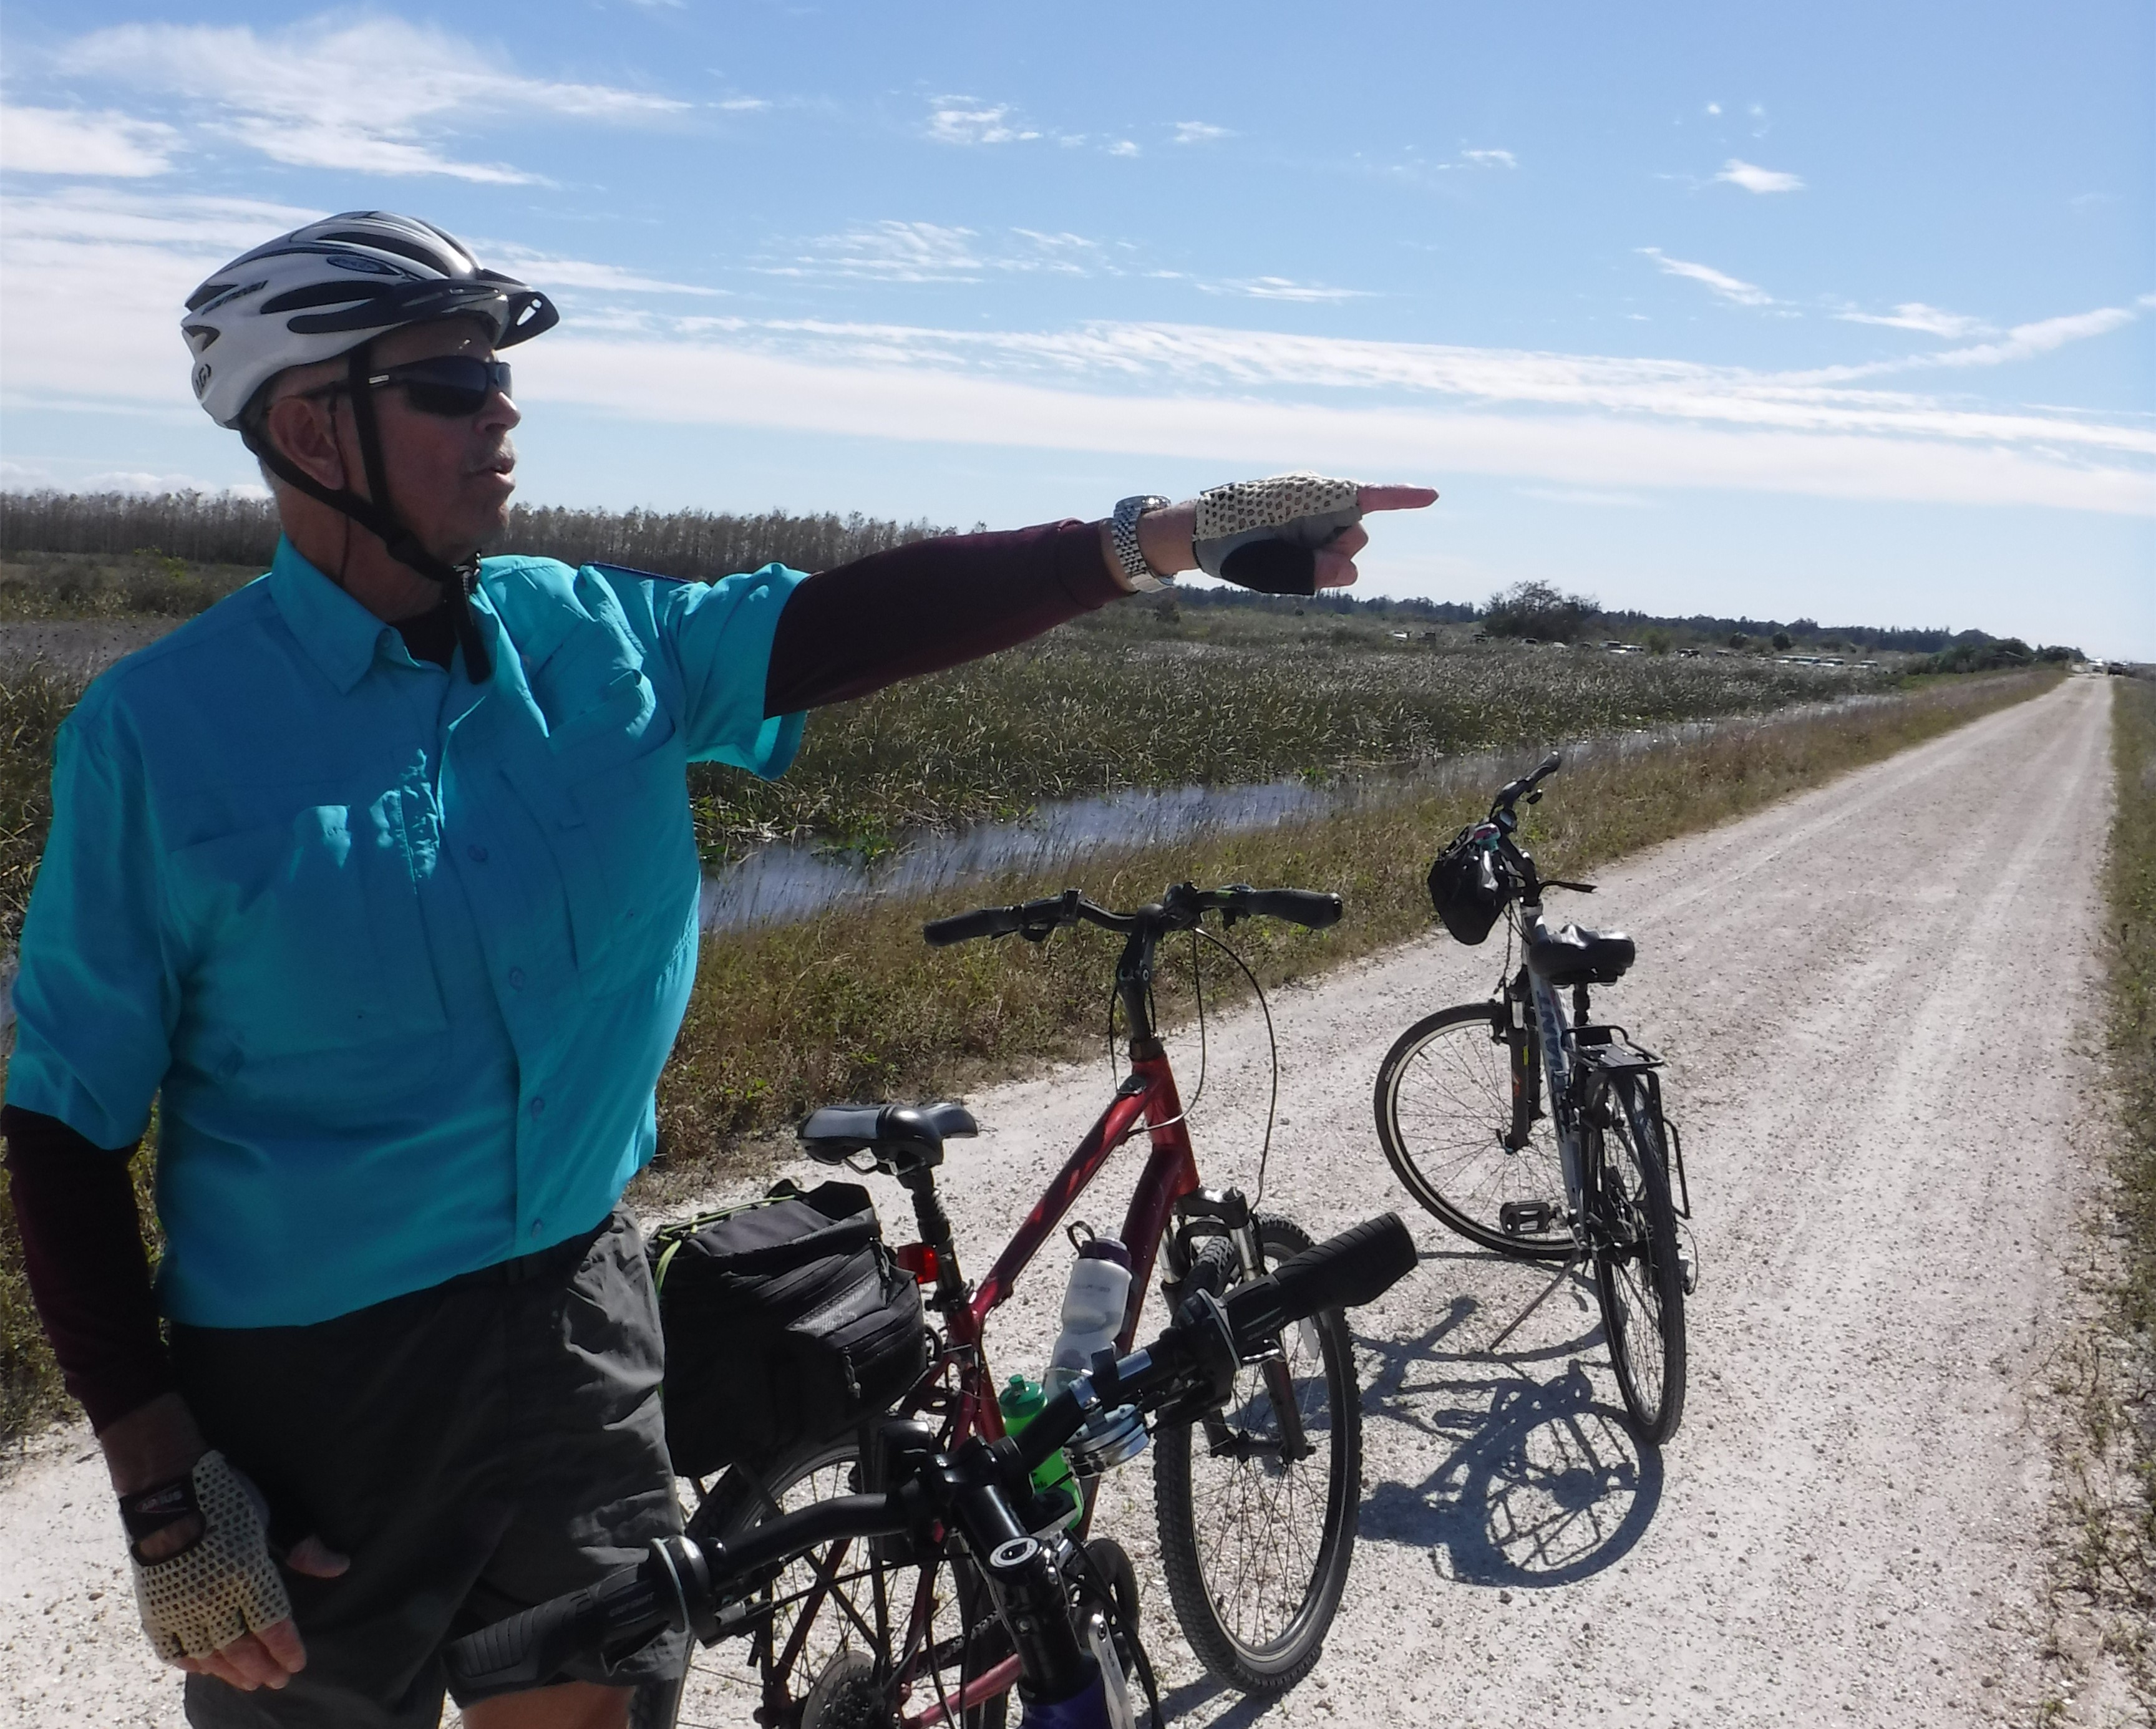 Bike tour leader Lowell Markey stands next to his bike pointing towards the Everglades.